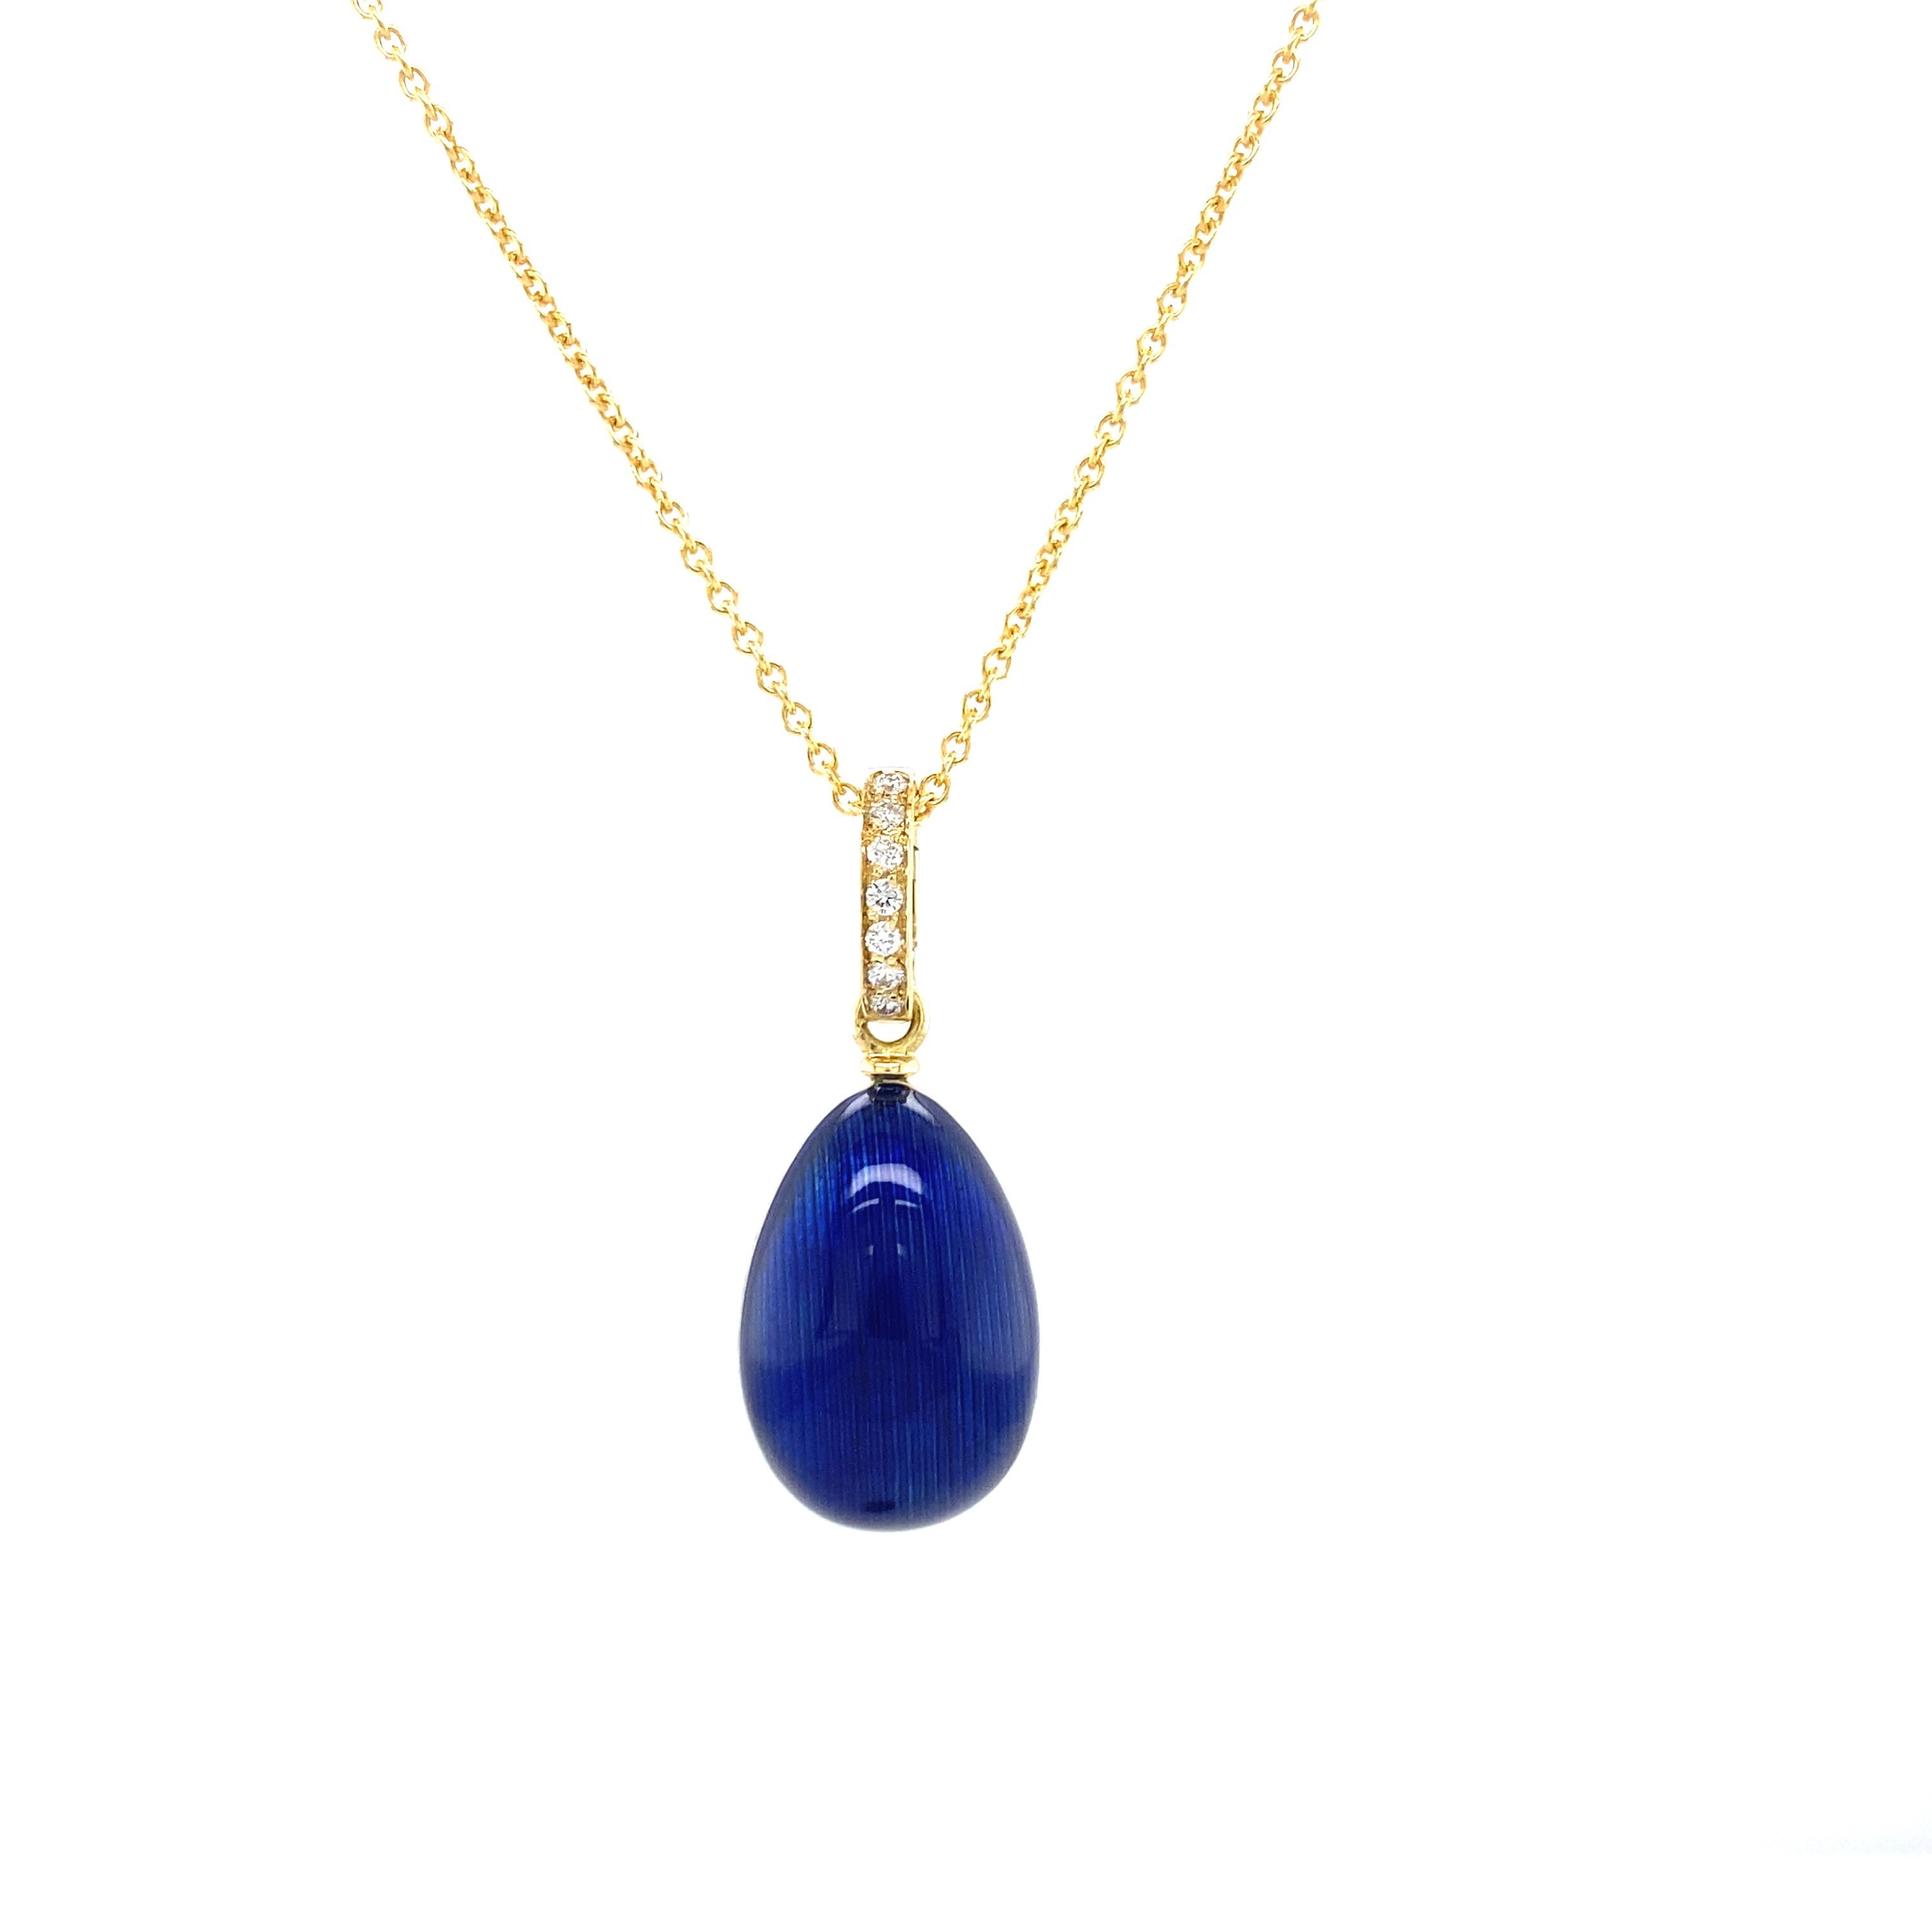 Victor Mayer Egg Shaped Pendant - 18k Yellow Gold - Electric Blue Vitreous Enamel - 7 Diamonds 0,16ct G/VS

About the creator Victor Mayer
Victor Mayer is internationally renowned for elegant timeless designs and unrivalled expertise in historic